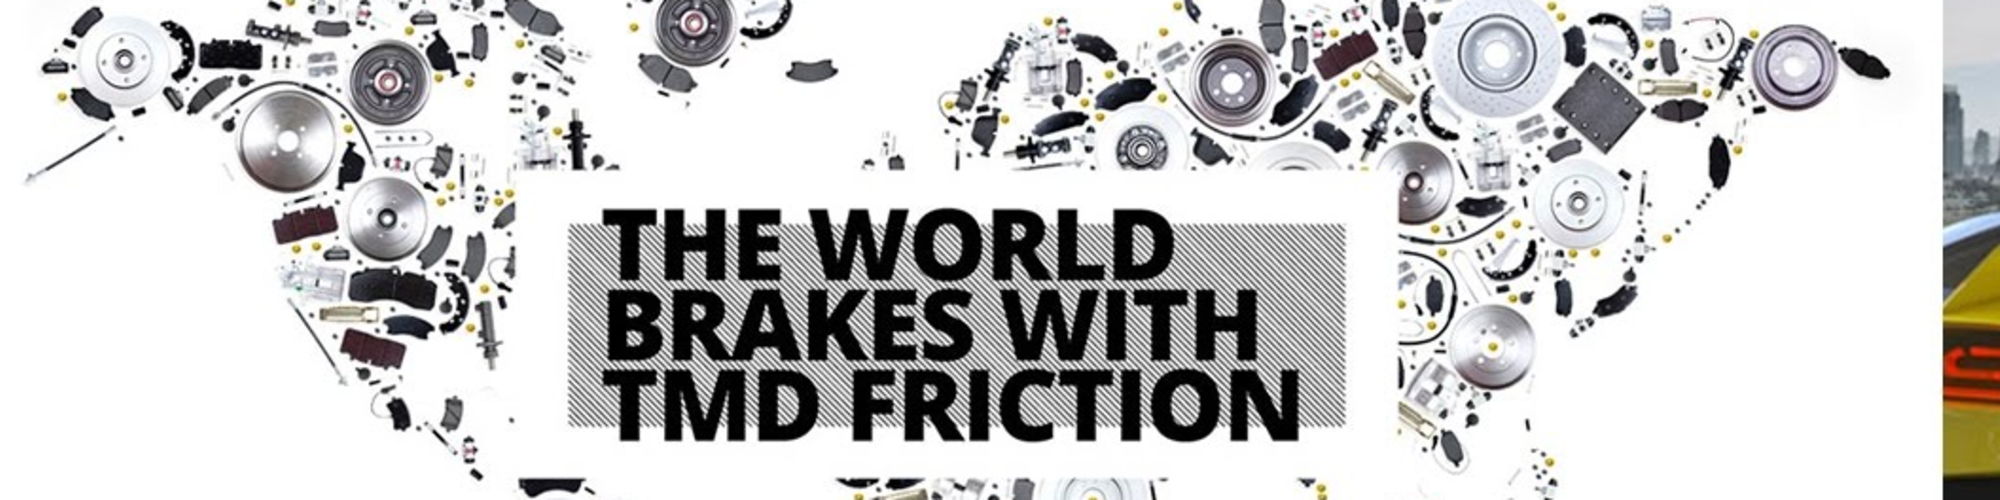 TMD Friction cover image